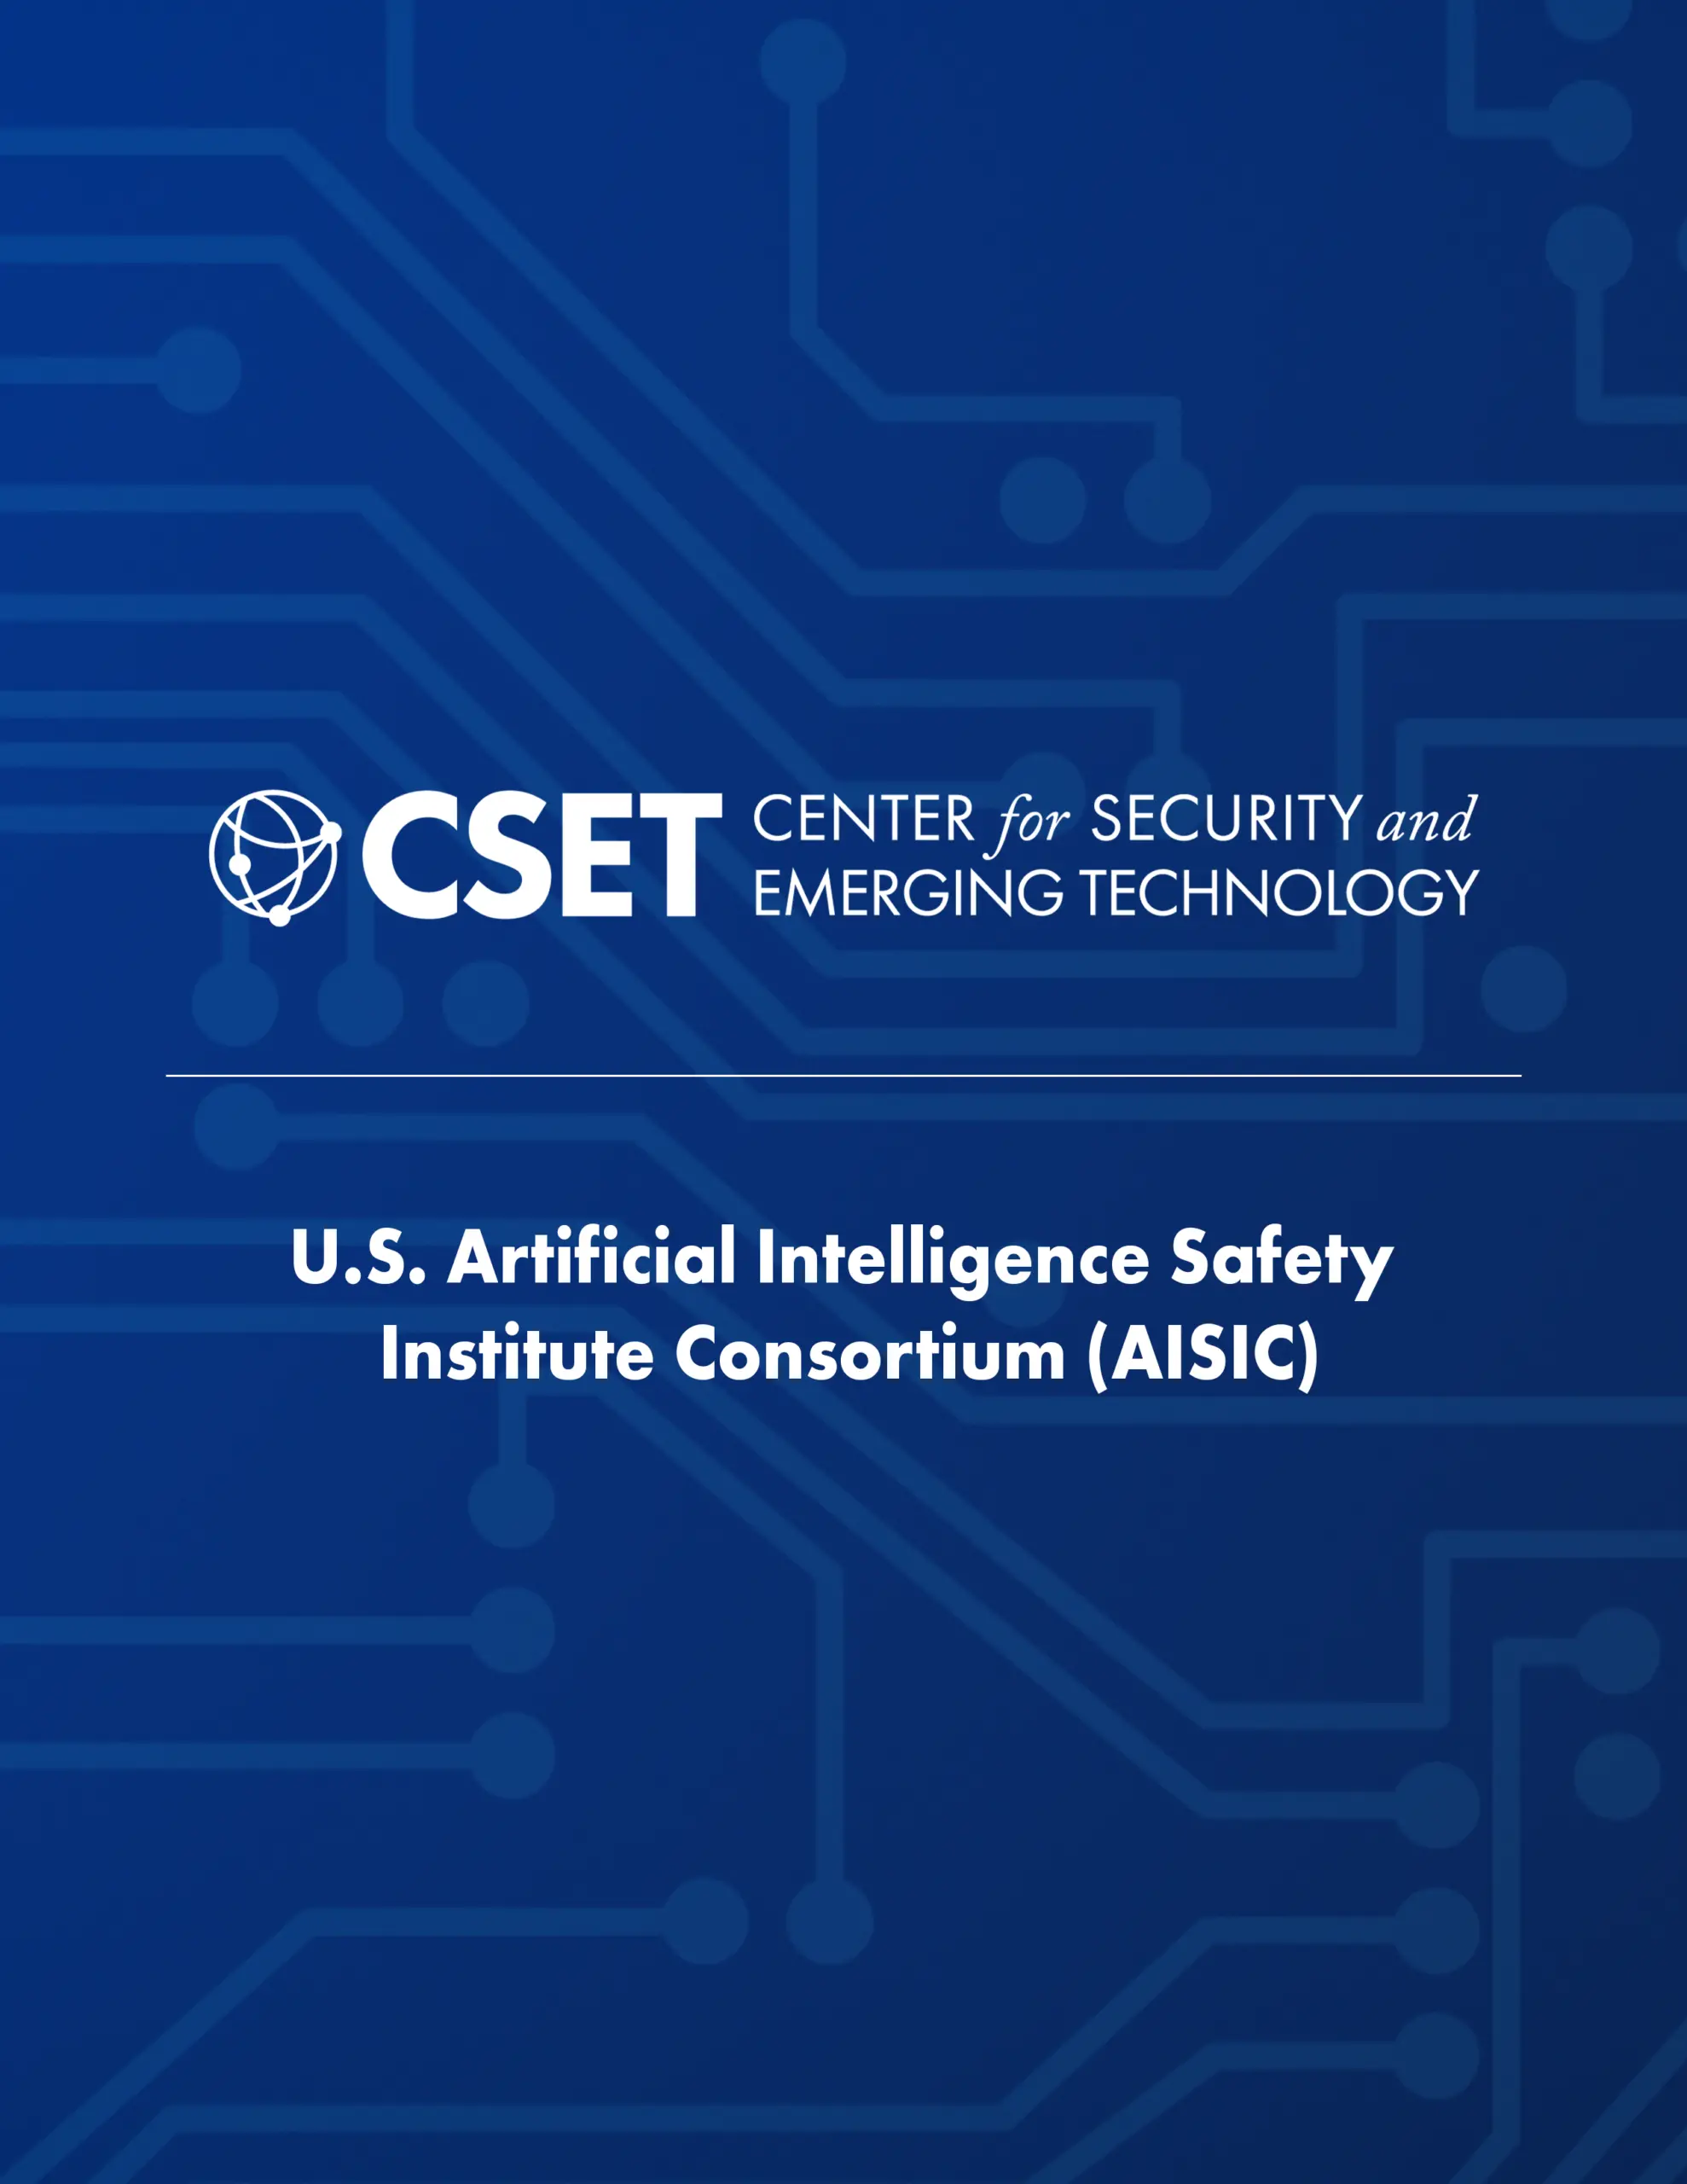 Center for Security and Emerging Technology | U.S. Artificial Intelligence Safety Institute Consortium - The image features a dark blue background with a circuit board pattern and the CSET logo at the top.